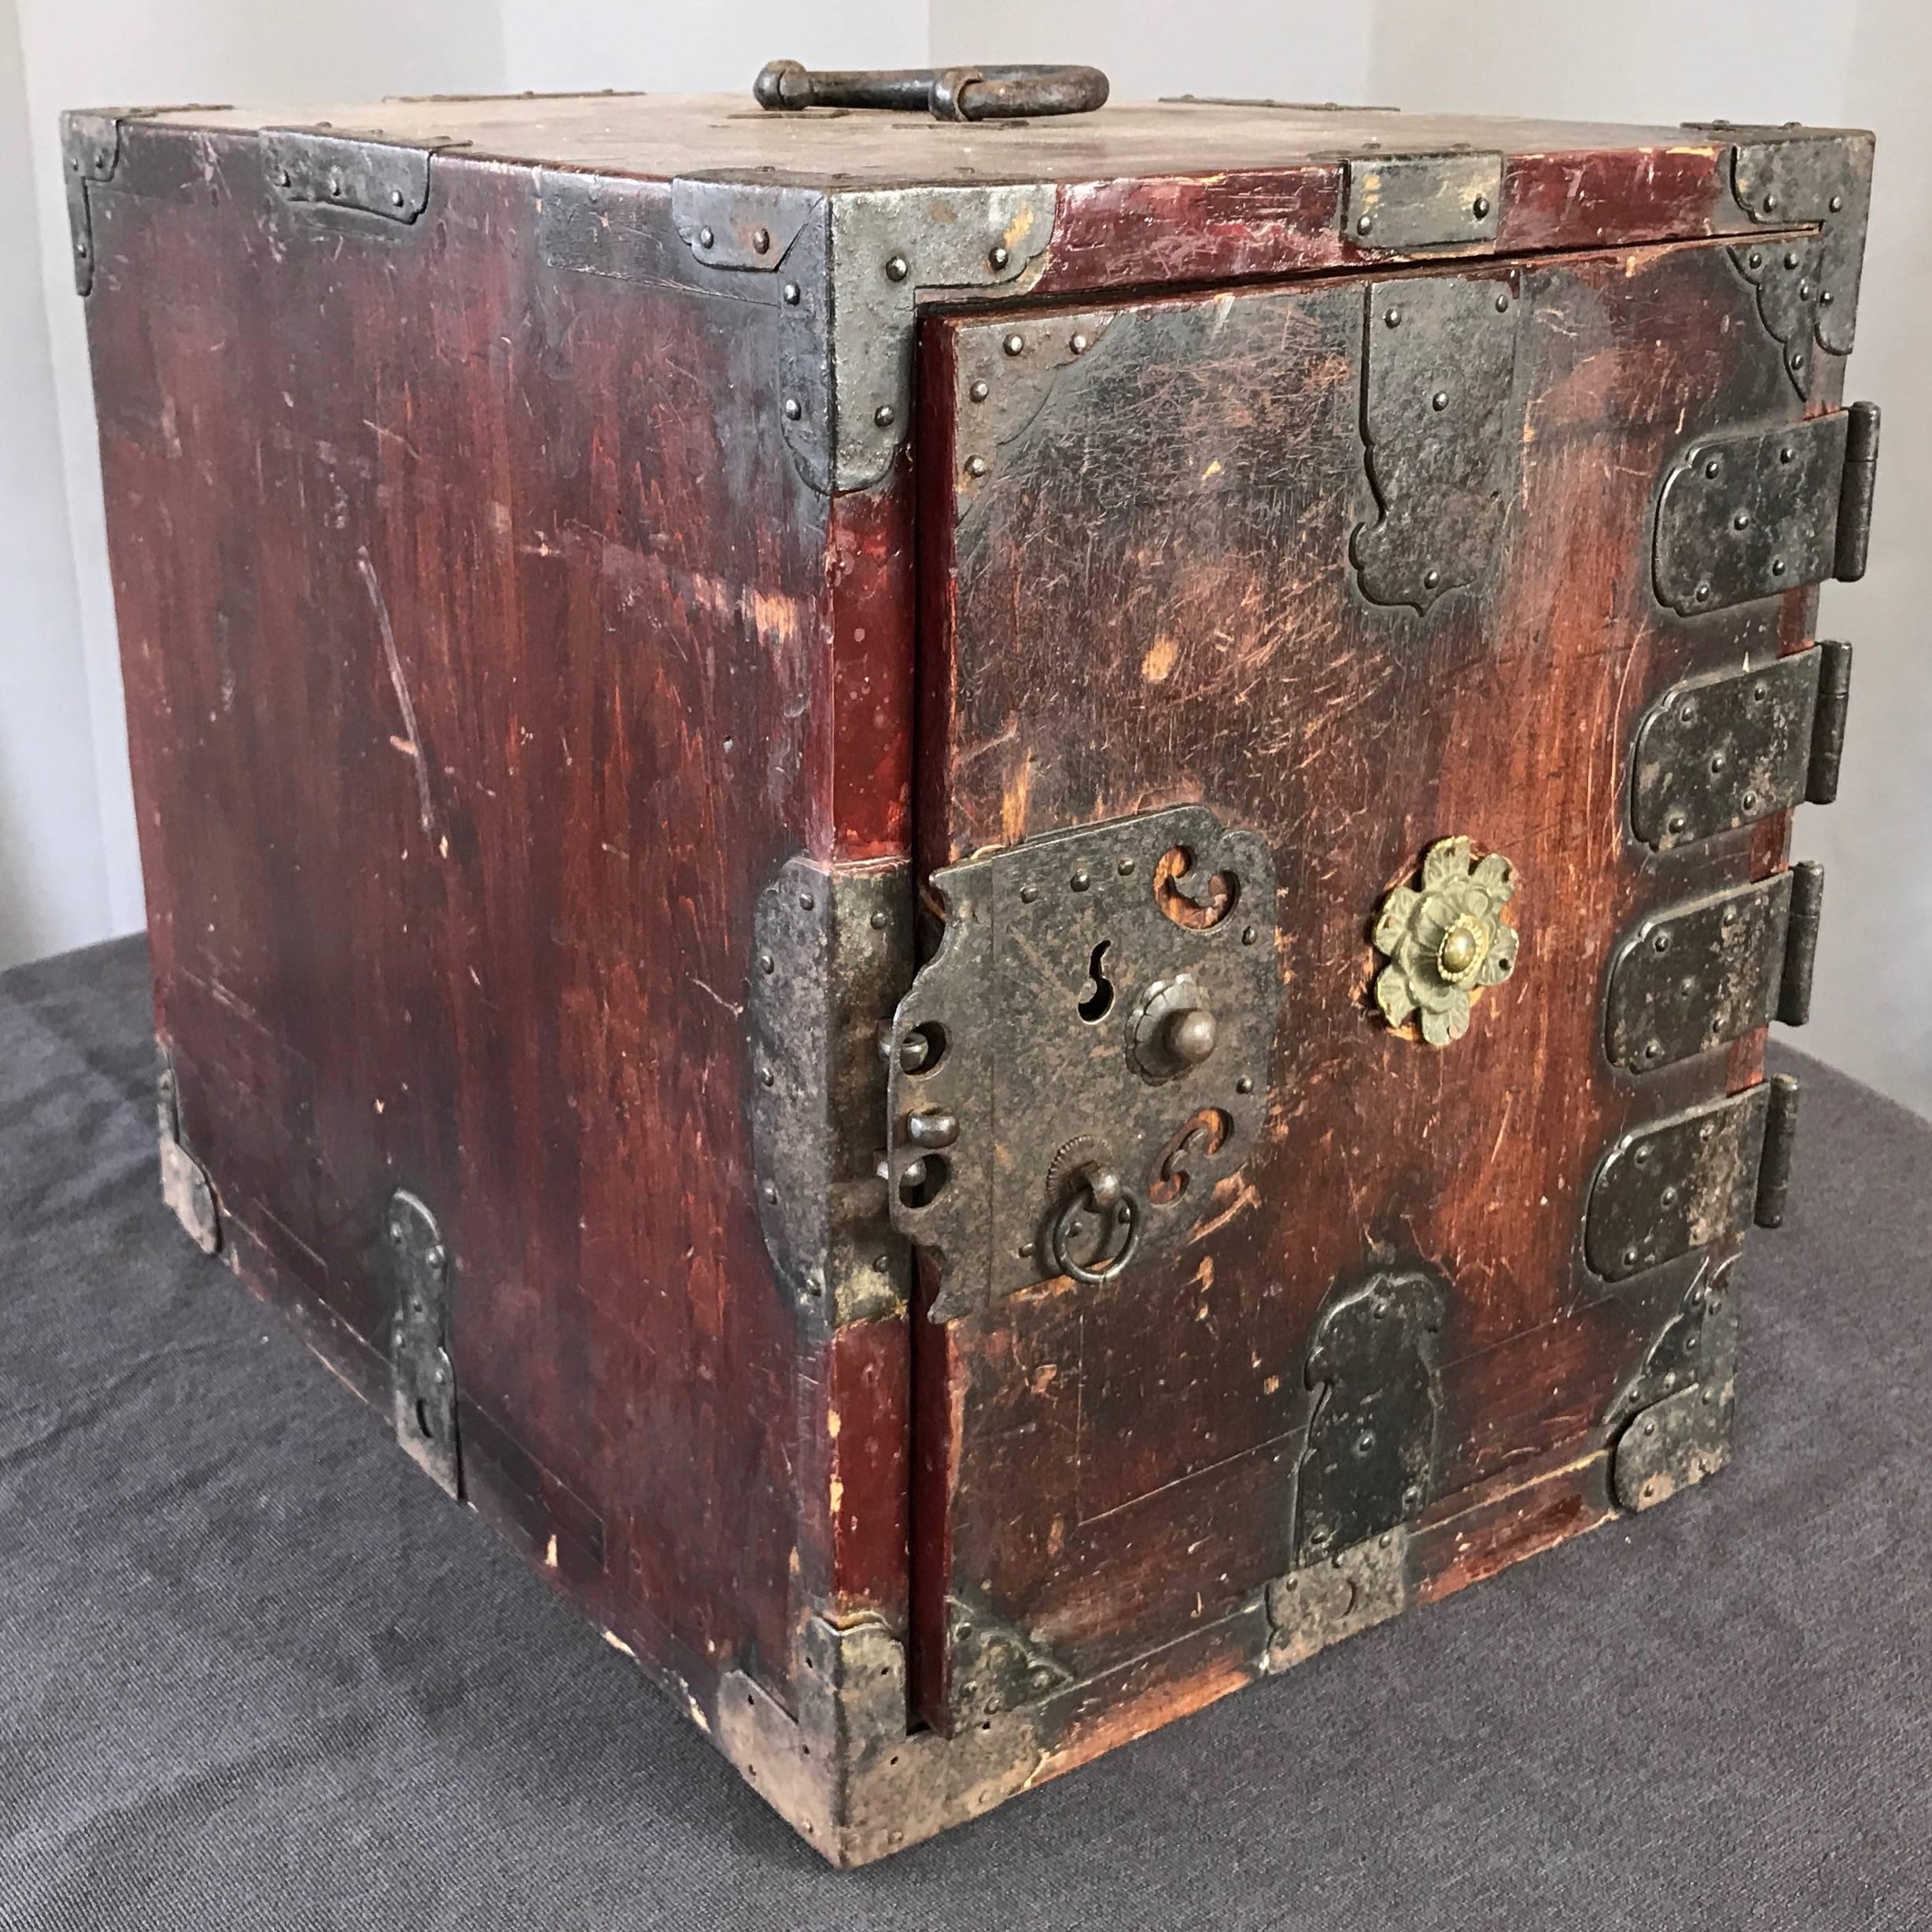 A compact and portable antique Chinese seaman’s or sailor’s chest with drawers, locks, and rare original key.

Handsomely worn wood with weathered reddish-brown finish displays intriguing history of chest being well-travelled and regularly relied